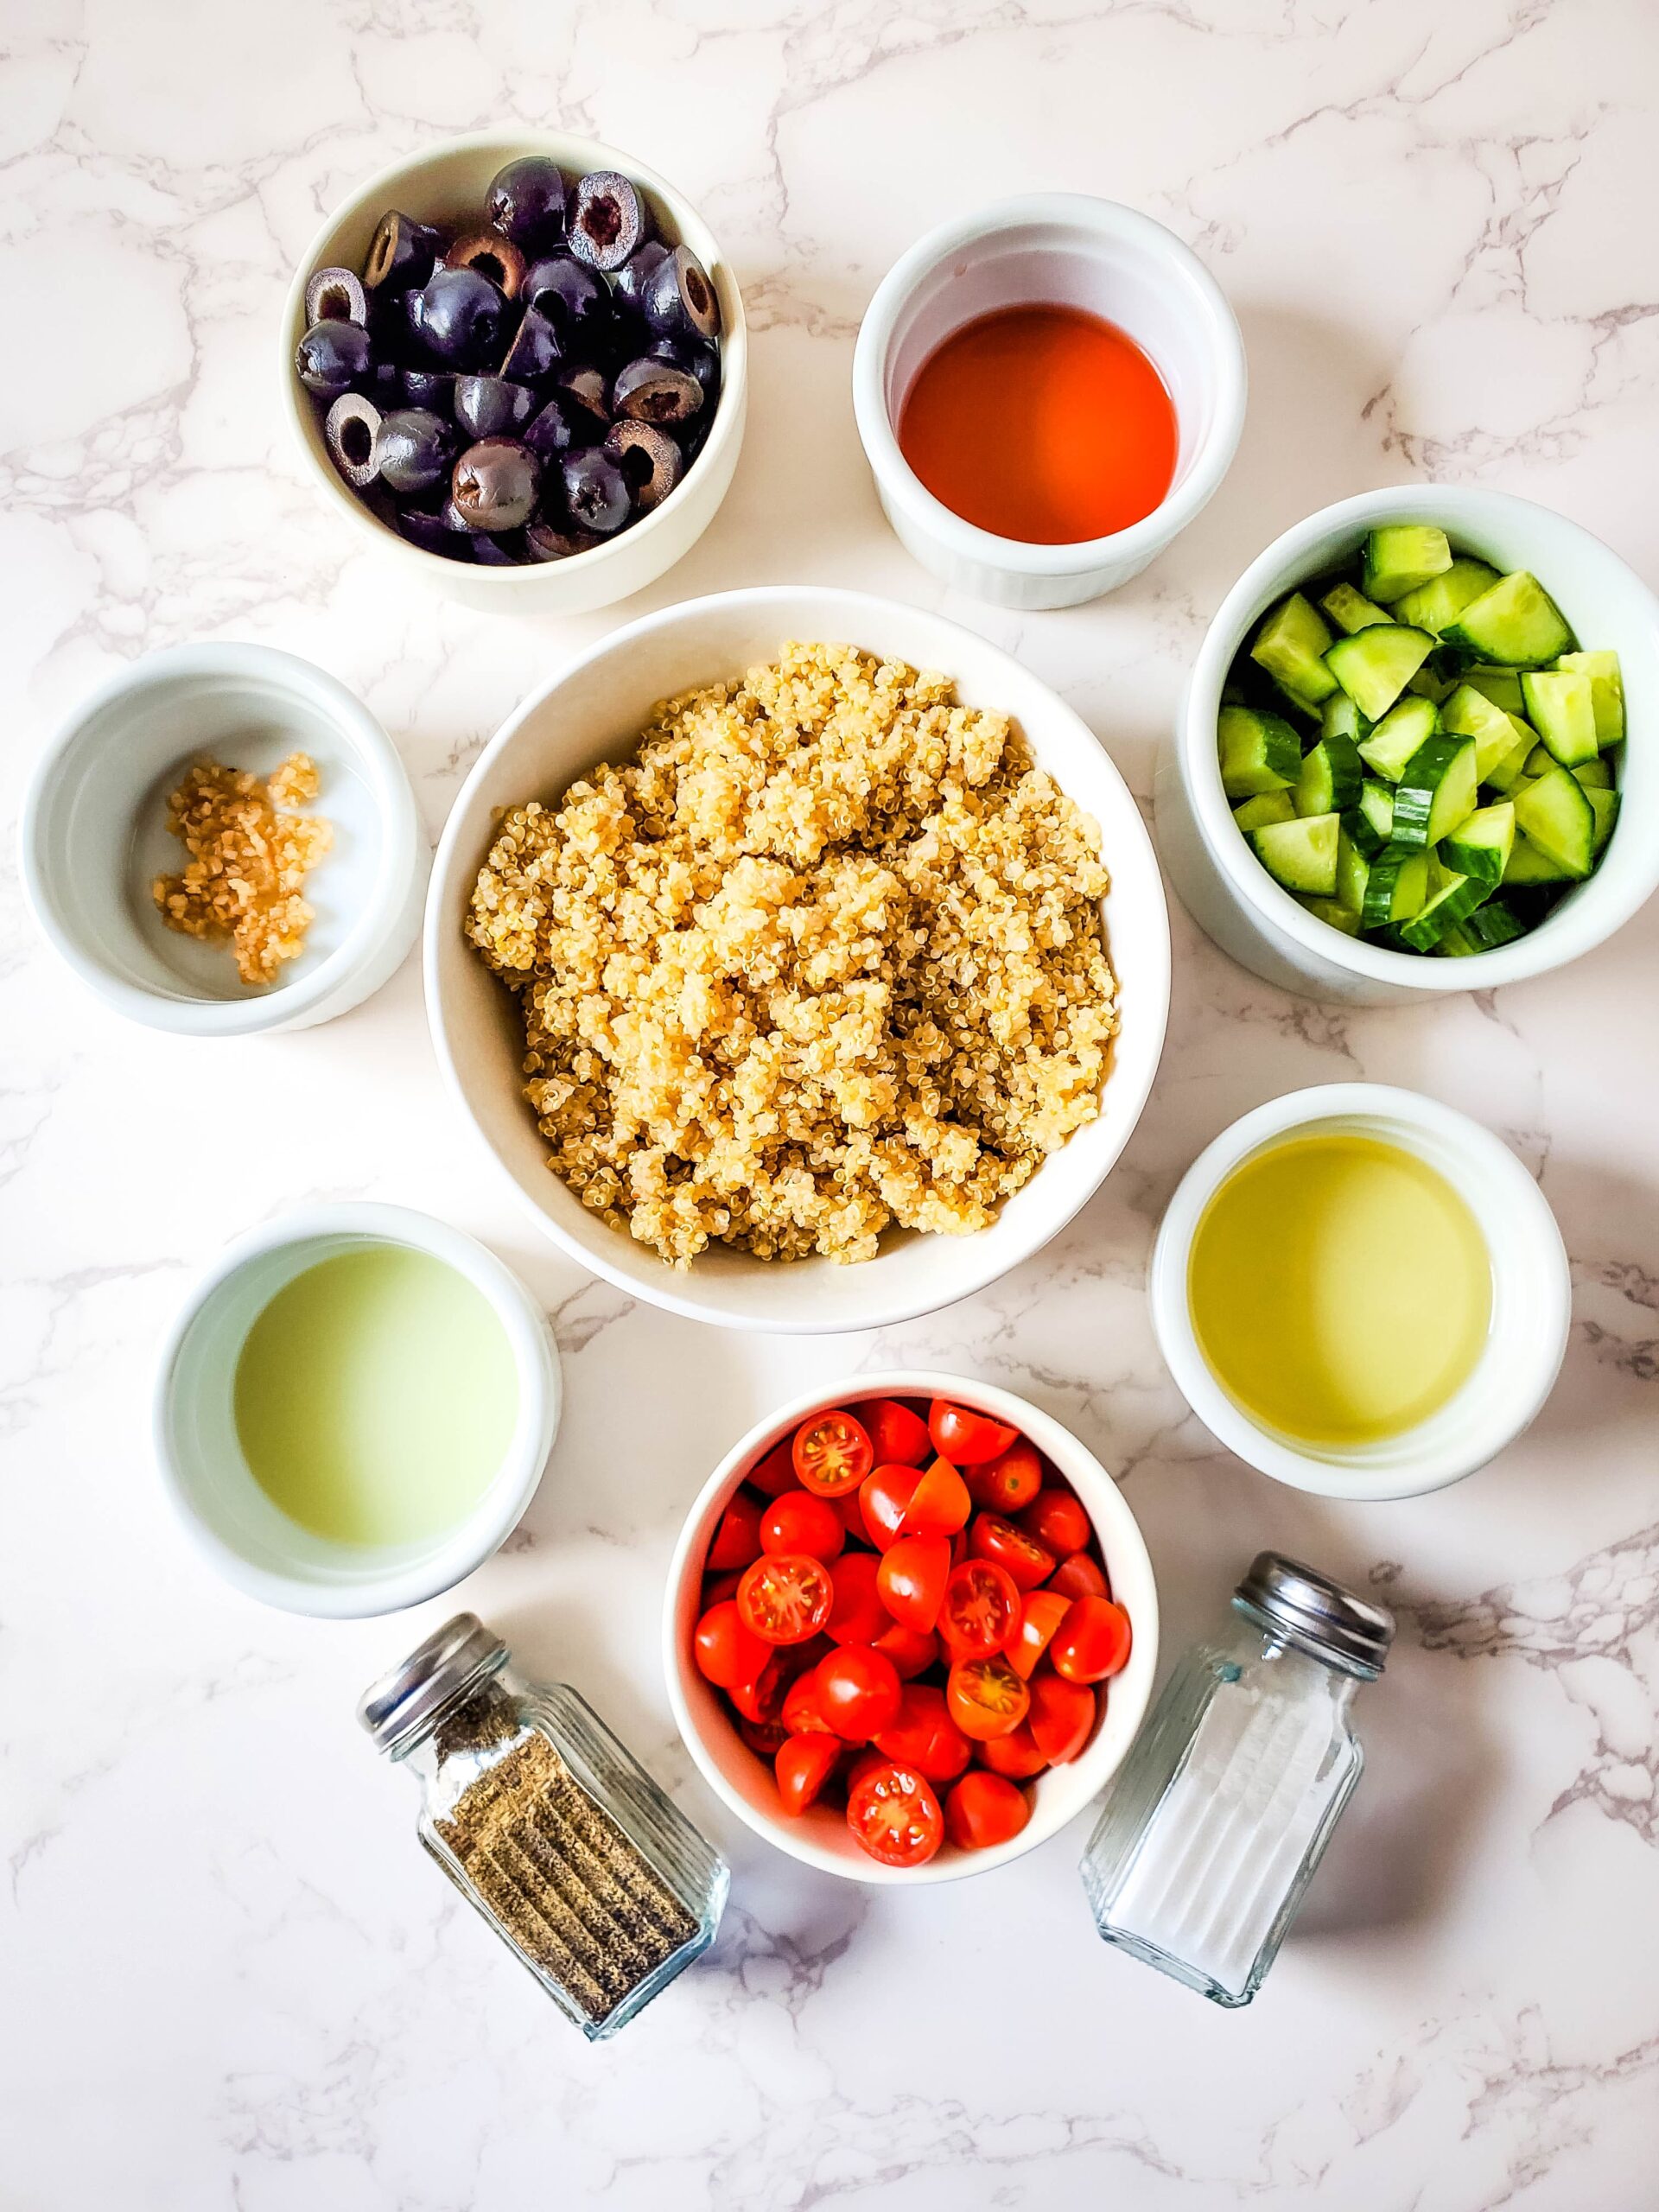 On a white marbled countertop are several white bowls. In the middle is a large bowl of cooked quinoa. In smaller bowls surrounding the large bowl are black olives, red wine vinegar, cucumber, oil, tomatoes, lemon juice, and garlic. Underneath the bowls are salt and pepper shakers.